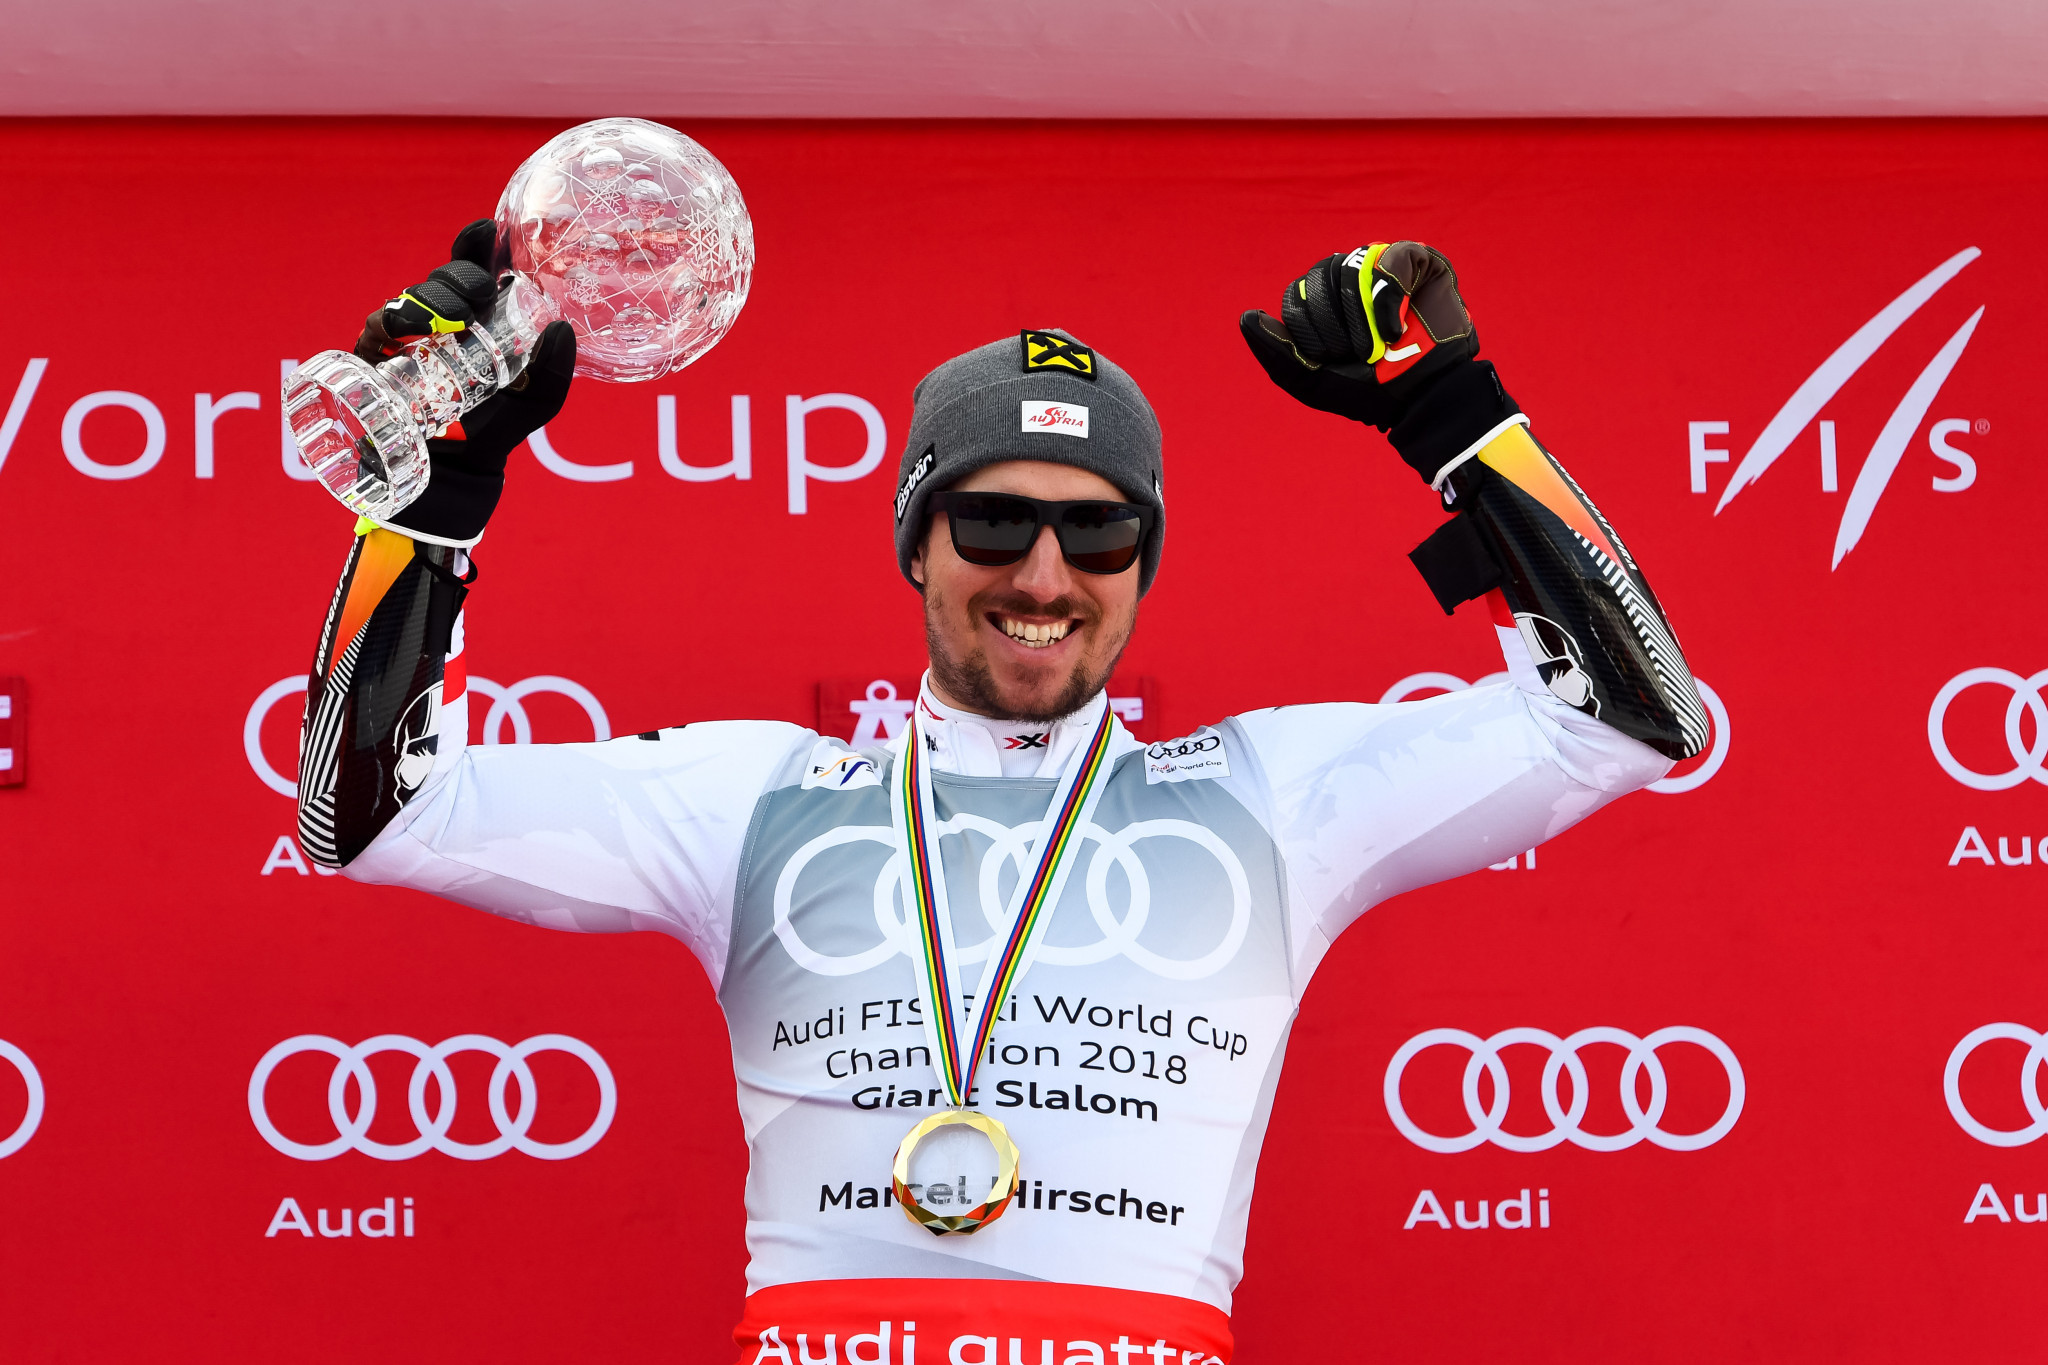 Marcel Hirscher wrapped up the giant slalom title in Sweden ©Getty Images